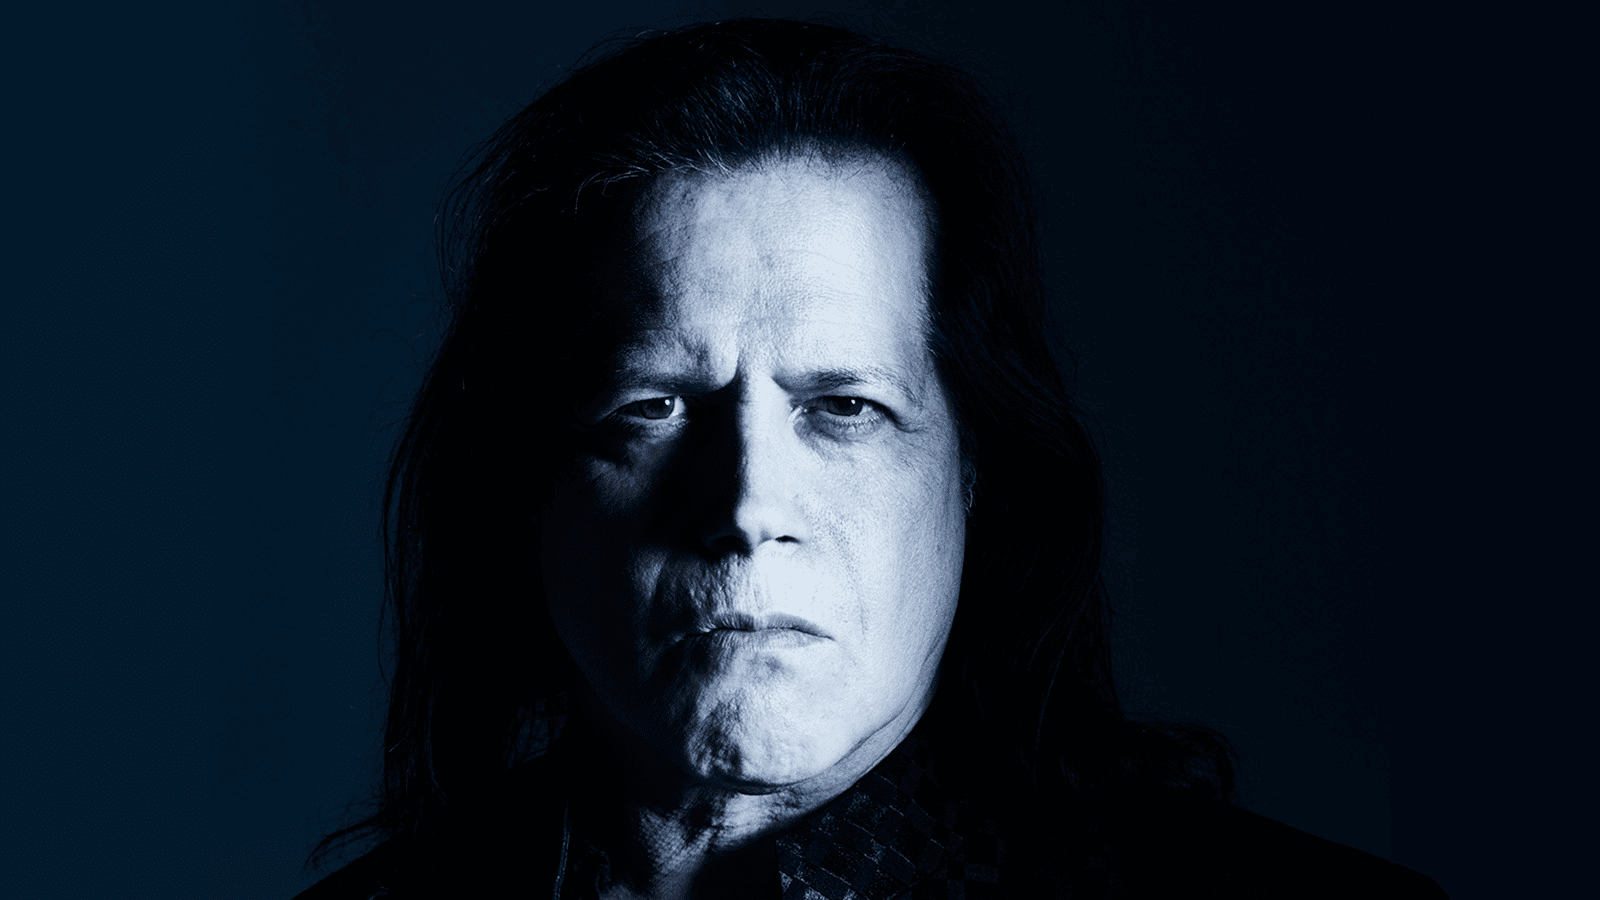 Danzig, Elvis Covers Show, Glenn Danzig, Elvis Presley, Montalban Theatre, Hollywood, Valentine'S Day, February 10, Retiring From Touring, New Music, Danzig Sings Elvis, Black Laden Crown, Rock And Roll, One-Off Show, Tickets, Limited Tickets, Special Performances, Montalban Theater, Valentine'S Day Weekend.